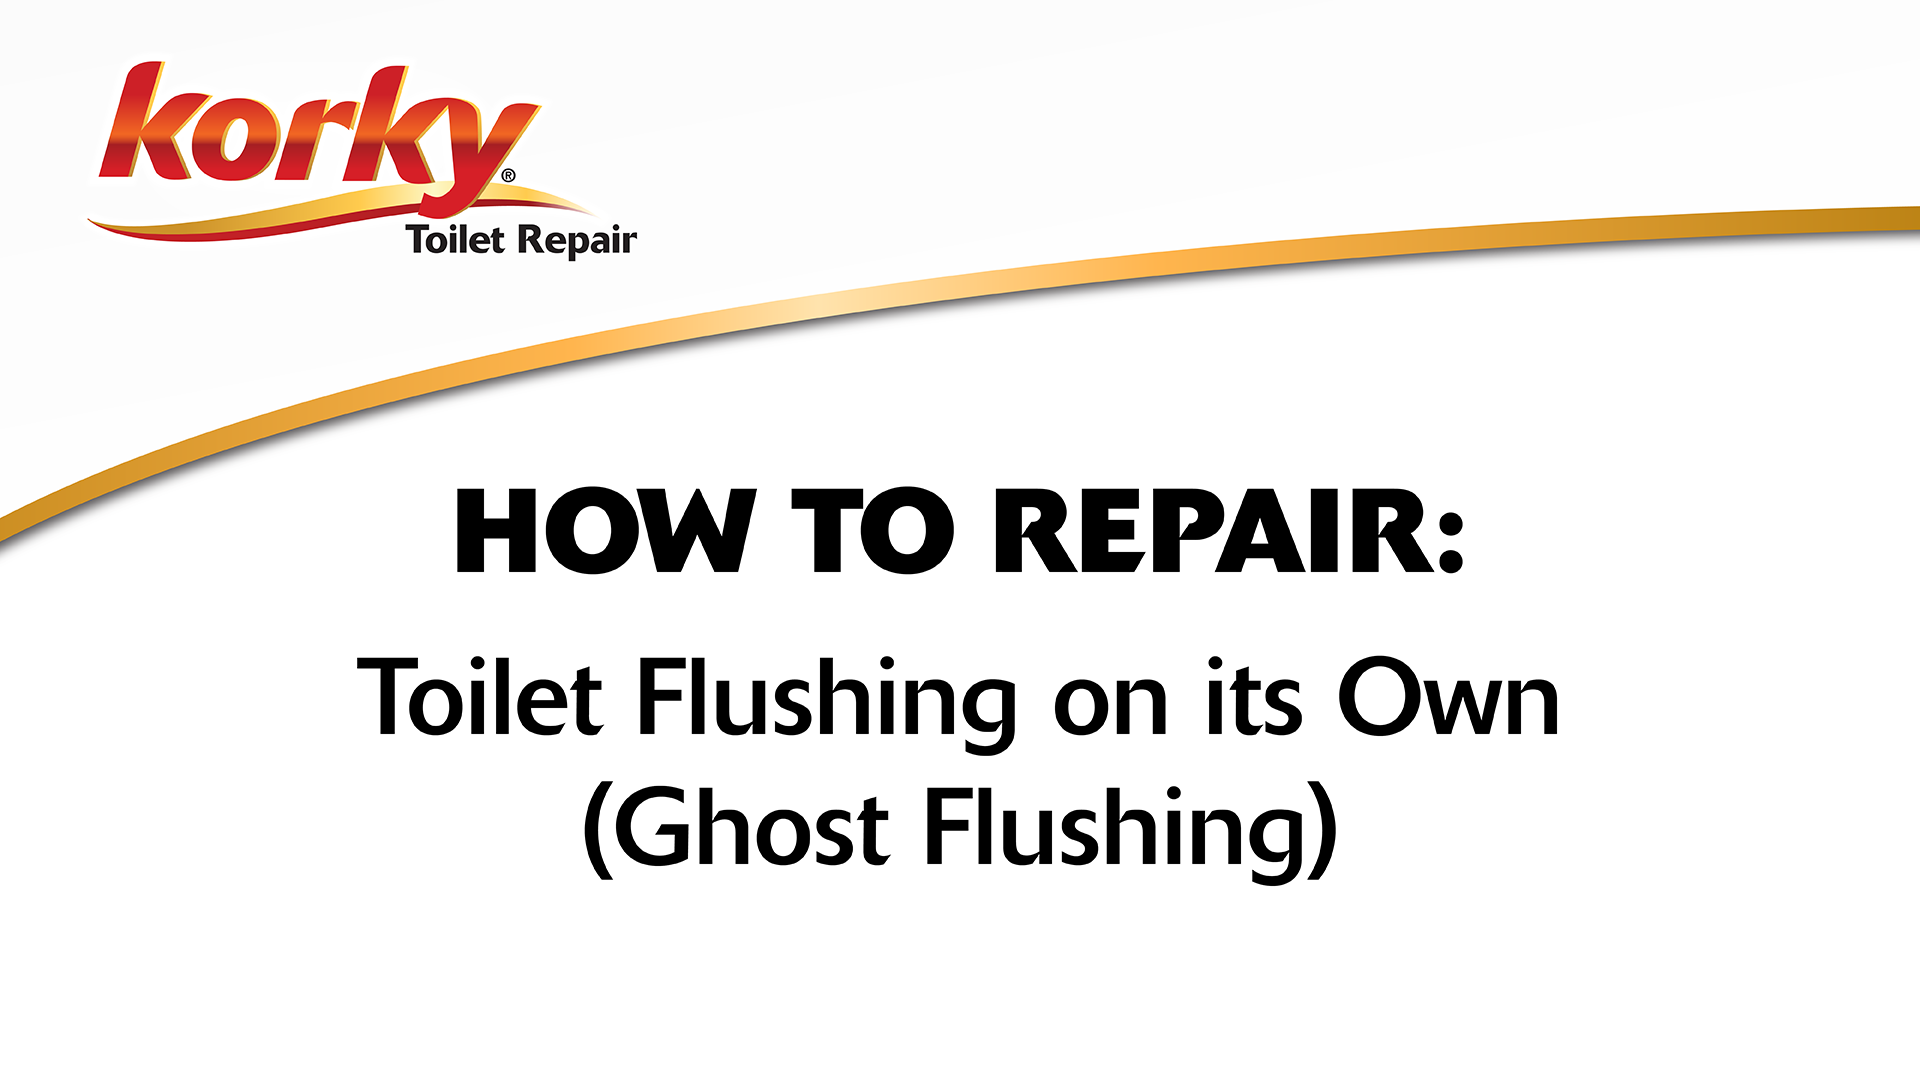 How to repair toilet flushing on its own video thumbnail